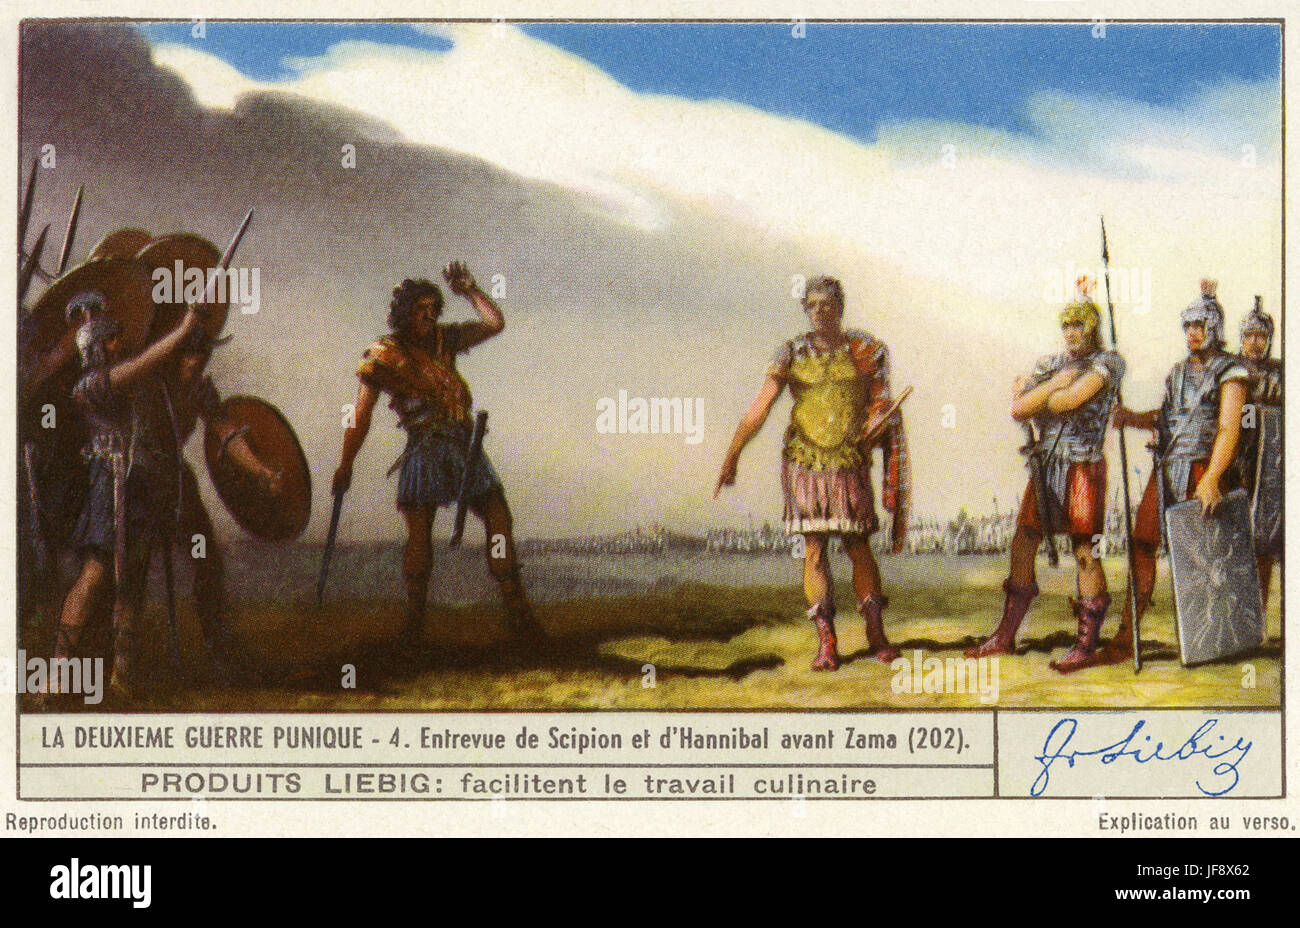 Meeting between Scipio and Hannibal before the Battle of Zama. Second Punic War between Carthage led by Hannibal and the Roman Empire. Liebig collectors' card 1939 Stock Photo